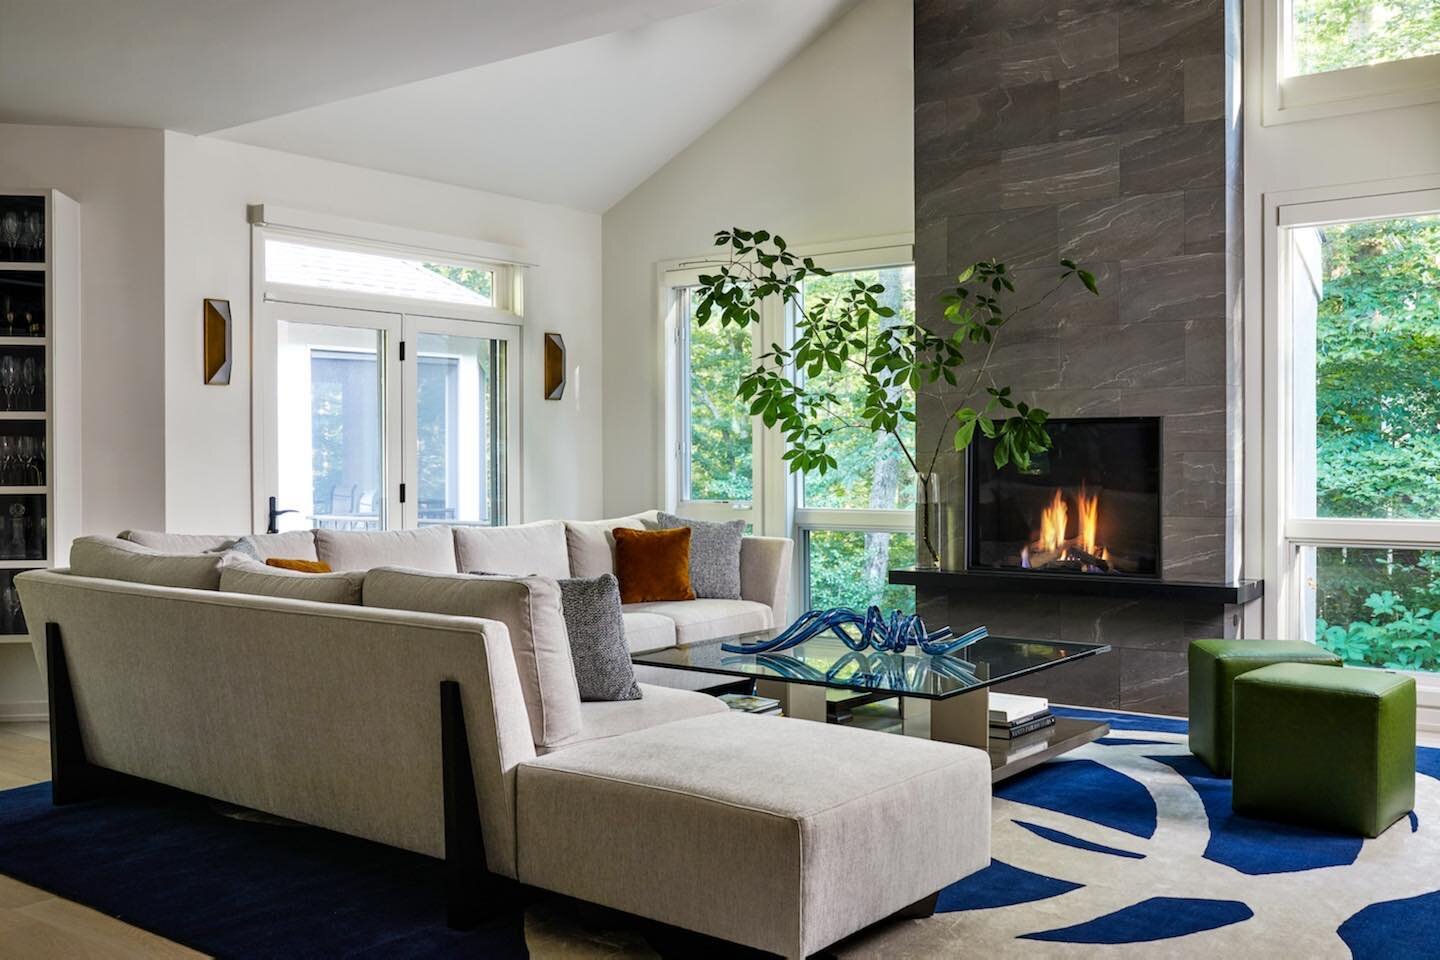 Time to start using the fireplace 🔥🔥🔥
.
.
.
#lotusinteriordesign #fireplace #familyroom #interiordesign #greatfallsva #residentialdesign

📸: @stacyzaringoldberg
Contractor: @bowa_designbuild